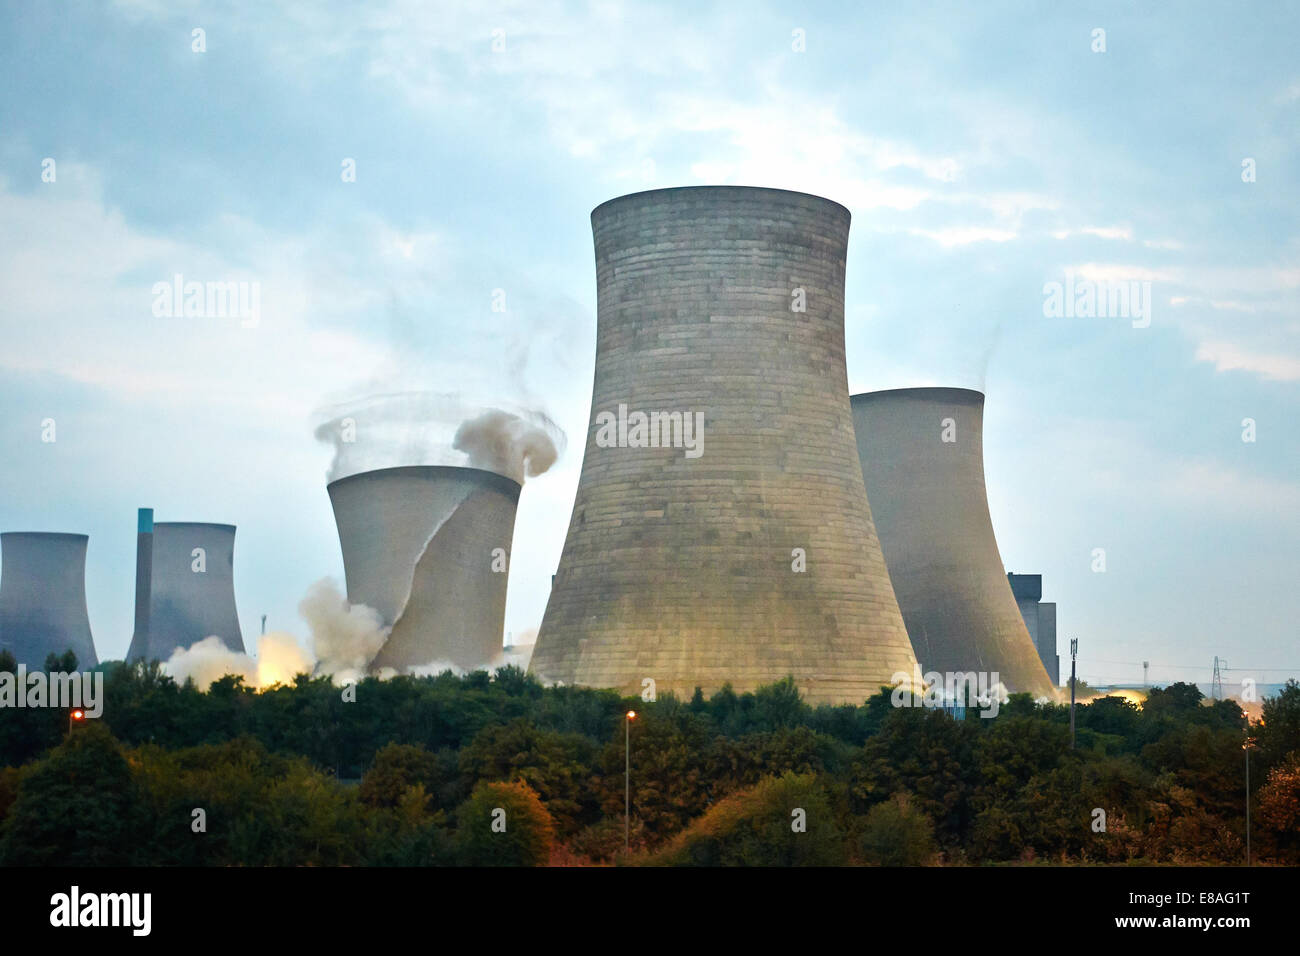 The 113m tall cooling towers at Didcot coal-fired power station are demolished using explosives at 5am in the morning. 5 of 13 Stock Photo